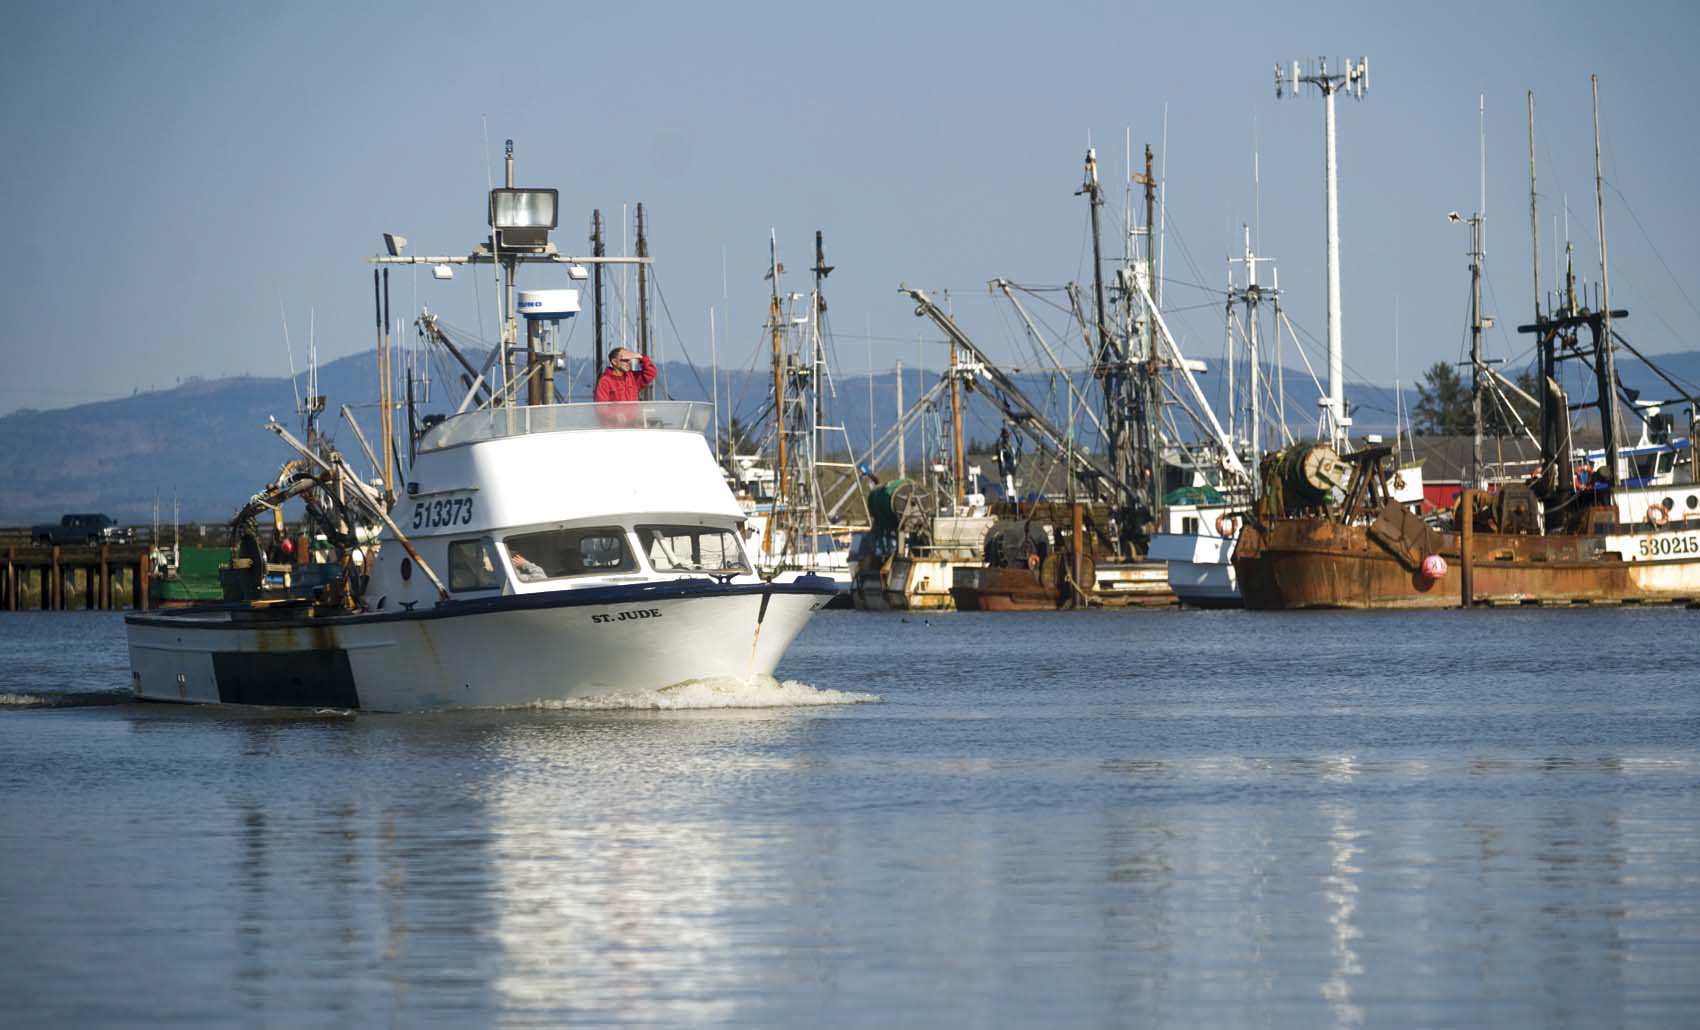 File--In this April 22, 2011, file photo, the St. Jude, a commercial fishing boat motors through the Warrenton Marina on the Skipanon River in Warrenton, Ore.  The Oregon Court of Appeals says Clatsop County can change its mind and block a pipeline that would carry natural gas to an export terminal at Warrenton.